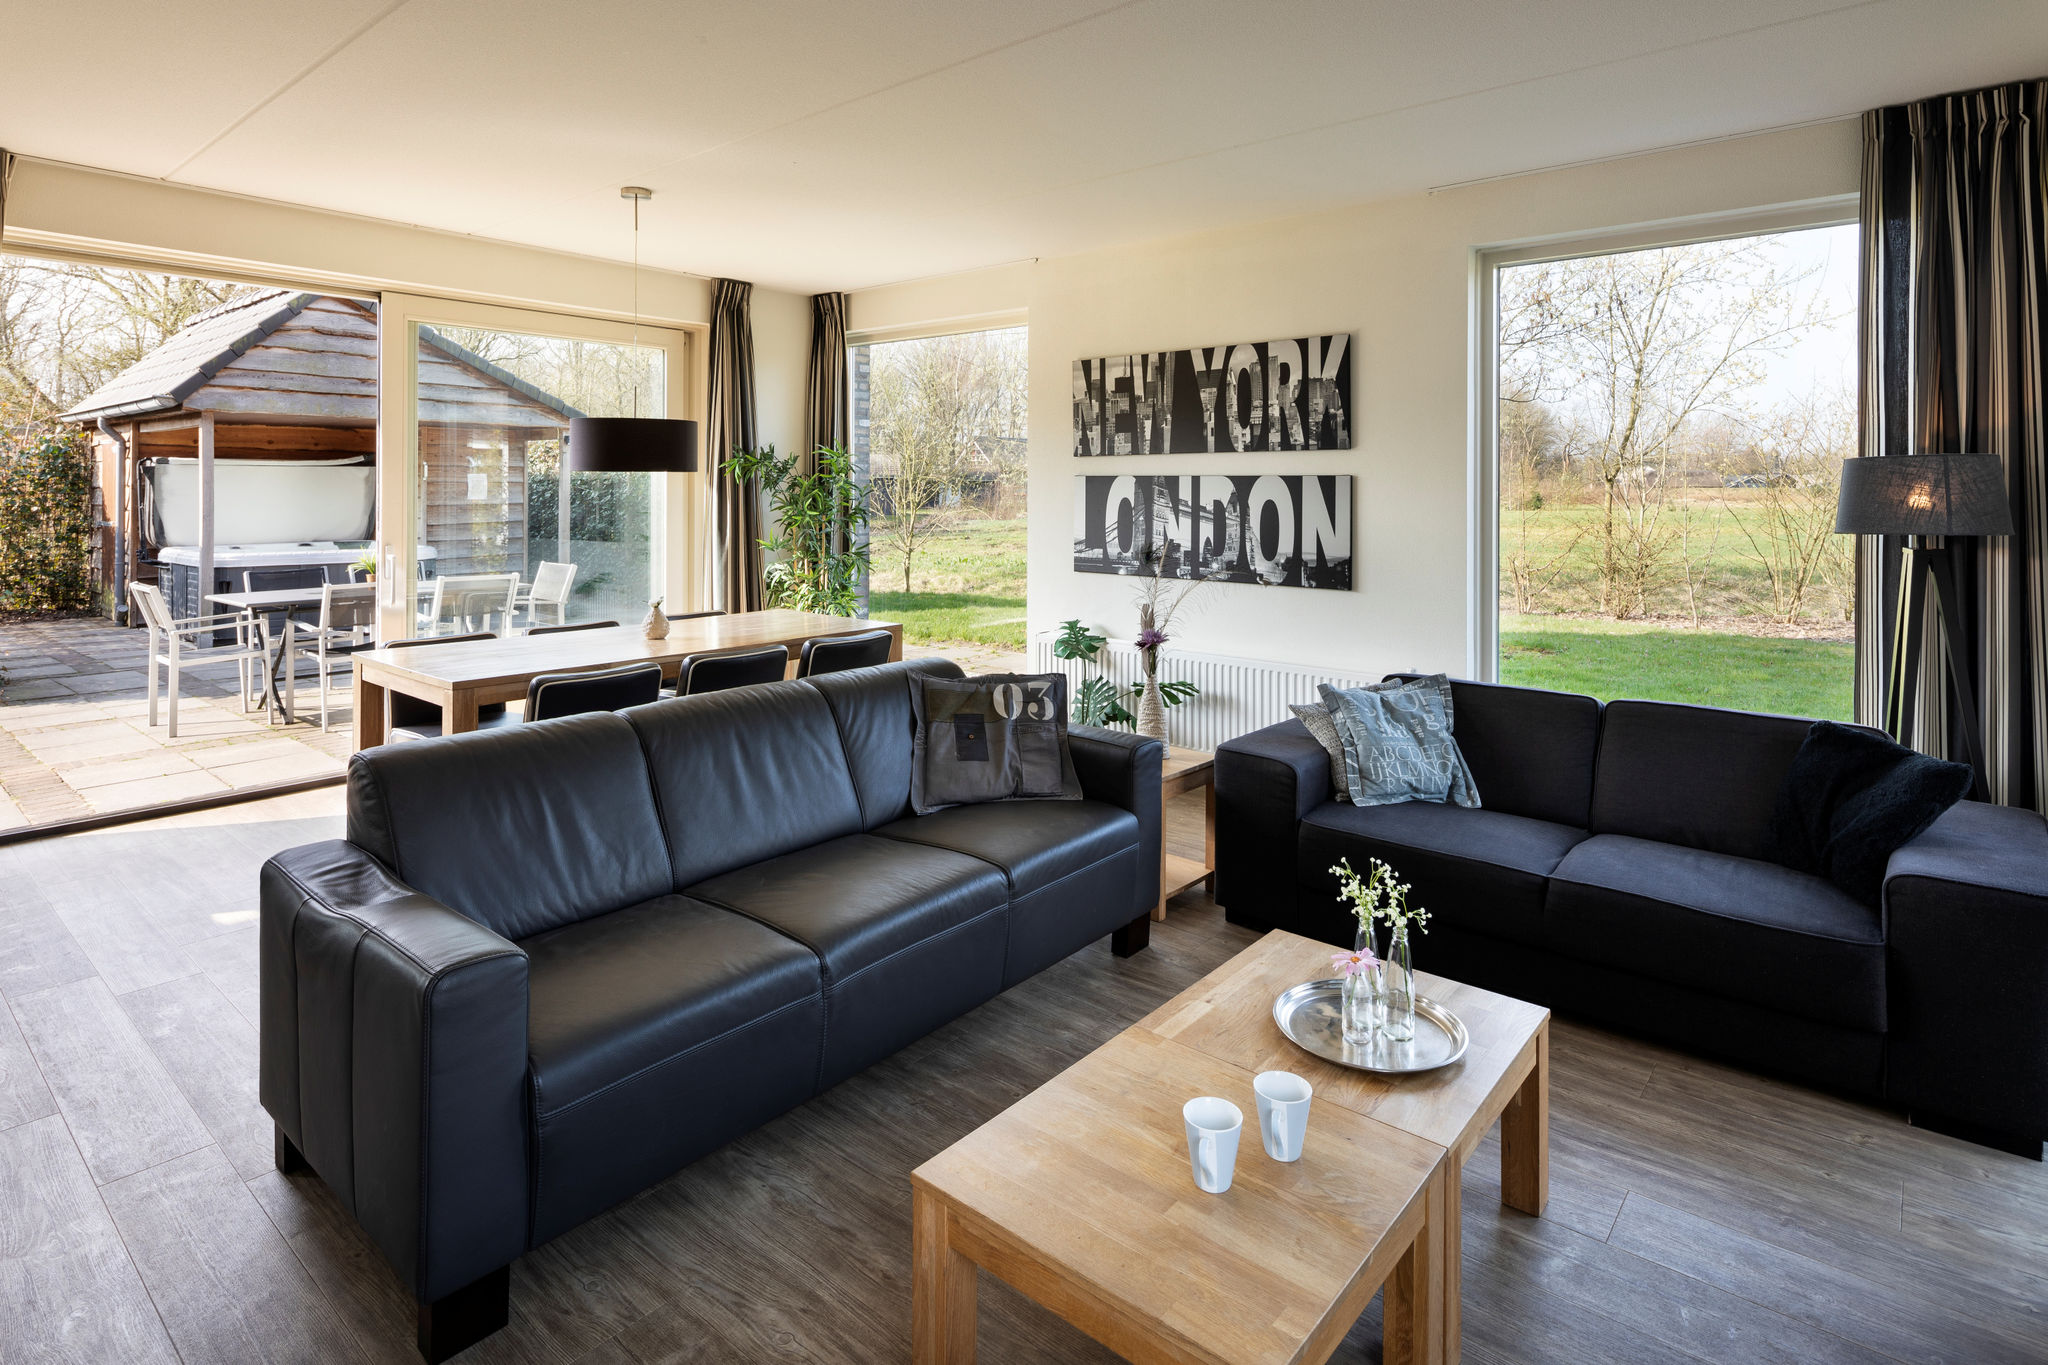 Luxury villa with whirlpool and jacuzzi, 8 km from Hoogeveen